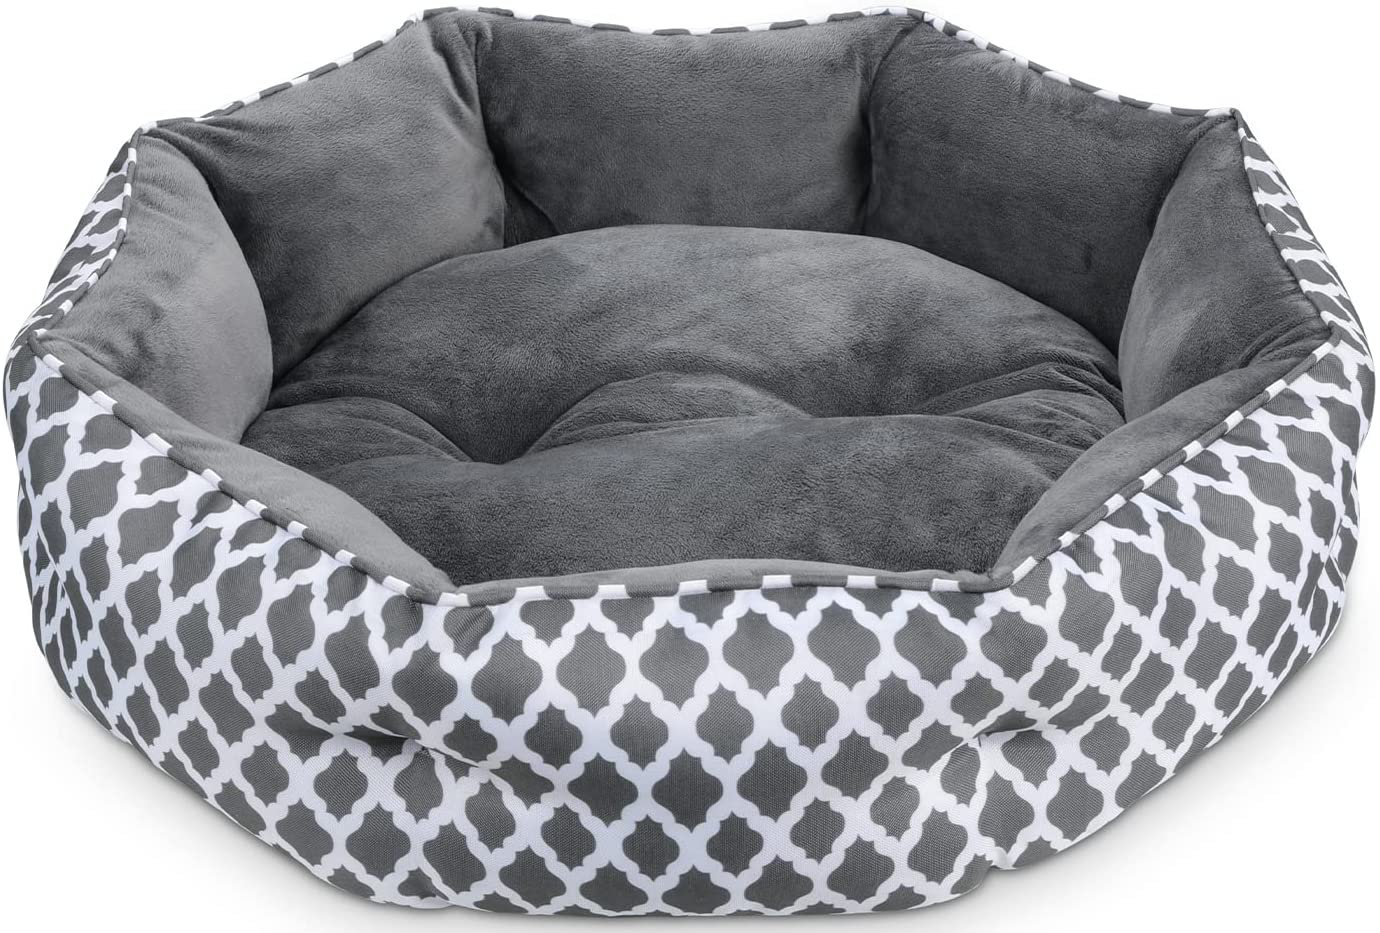 JOYO Cat Bed for Indoor Cat, 20 Inch Cat Bed Machine Washable with Waterproof Non-Slip Bottom, Double-Sided Kitten Plush Cushion Bed for Small Dogs, Soft Flannel round Warming Sofa Bed for Kitty Puppy Animals & Pet Supplies > Pet Supplies > Cat Supplies > Cat Beds JOYO Grey Small 